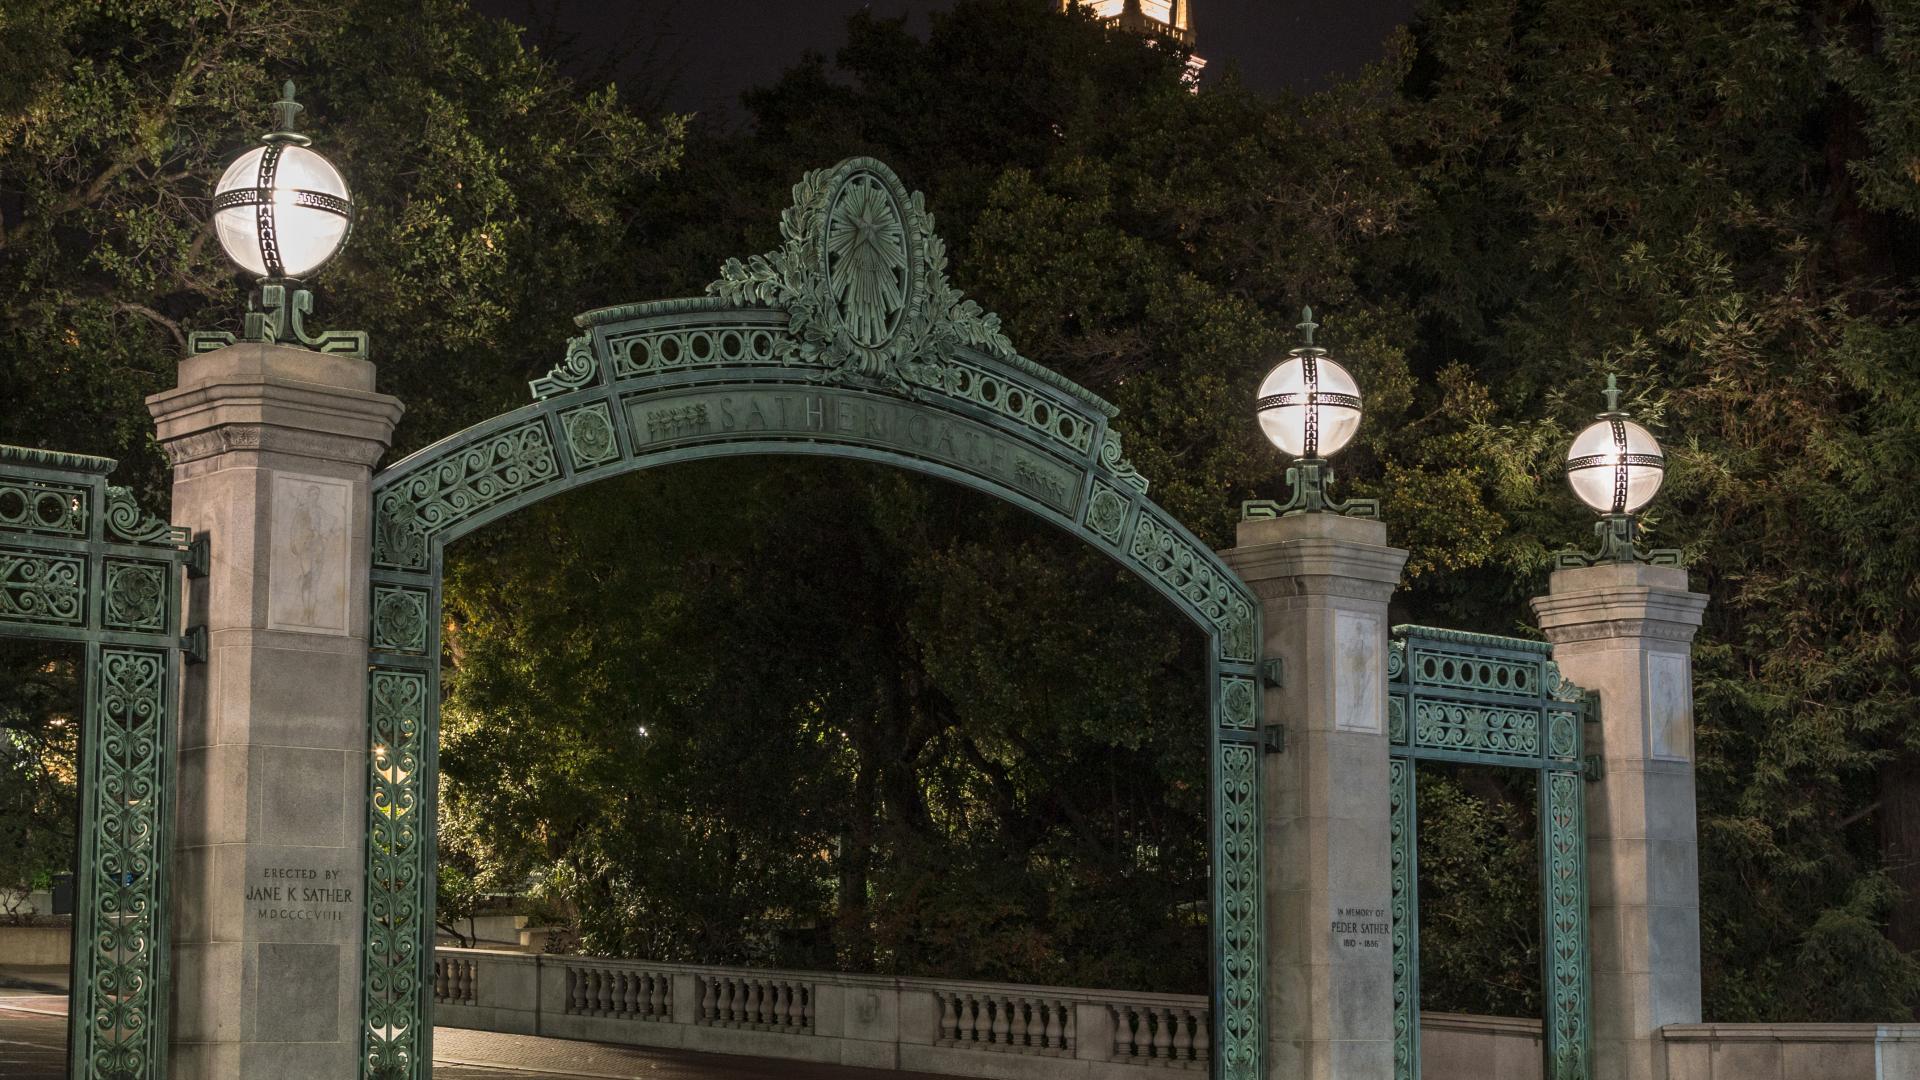 An arch on the Berkeley campus at night